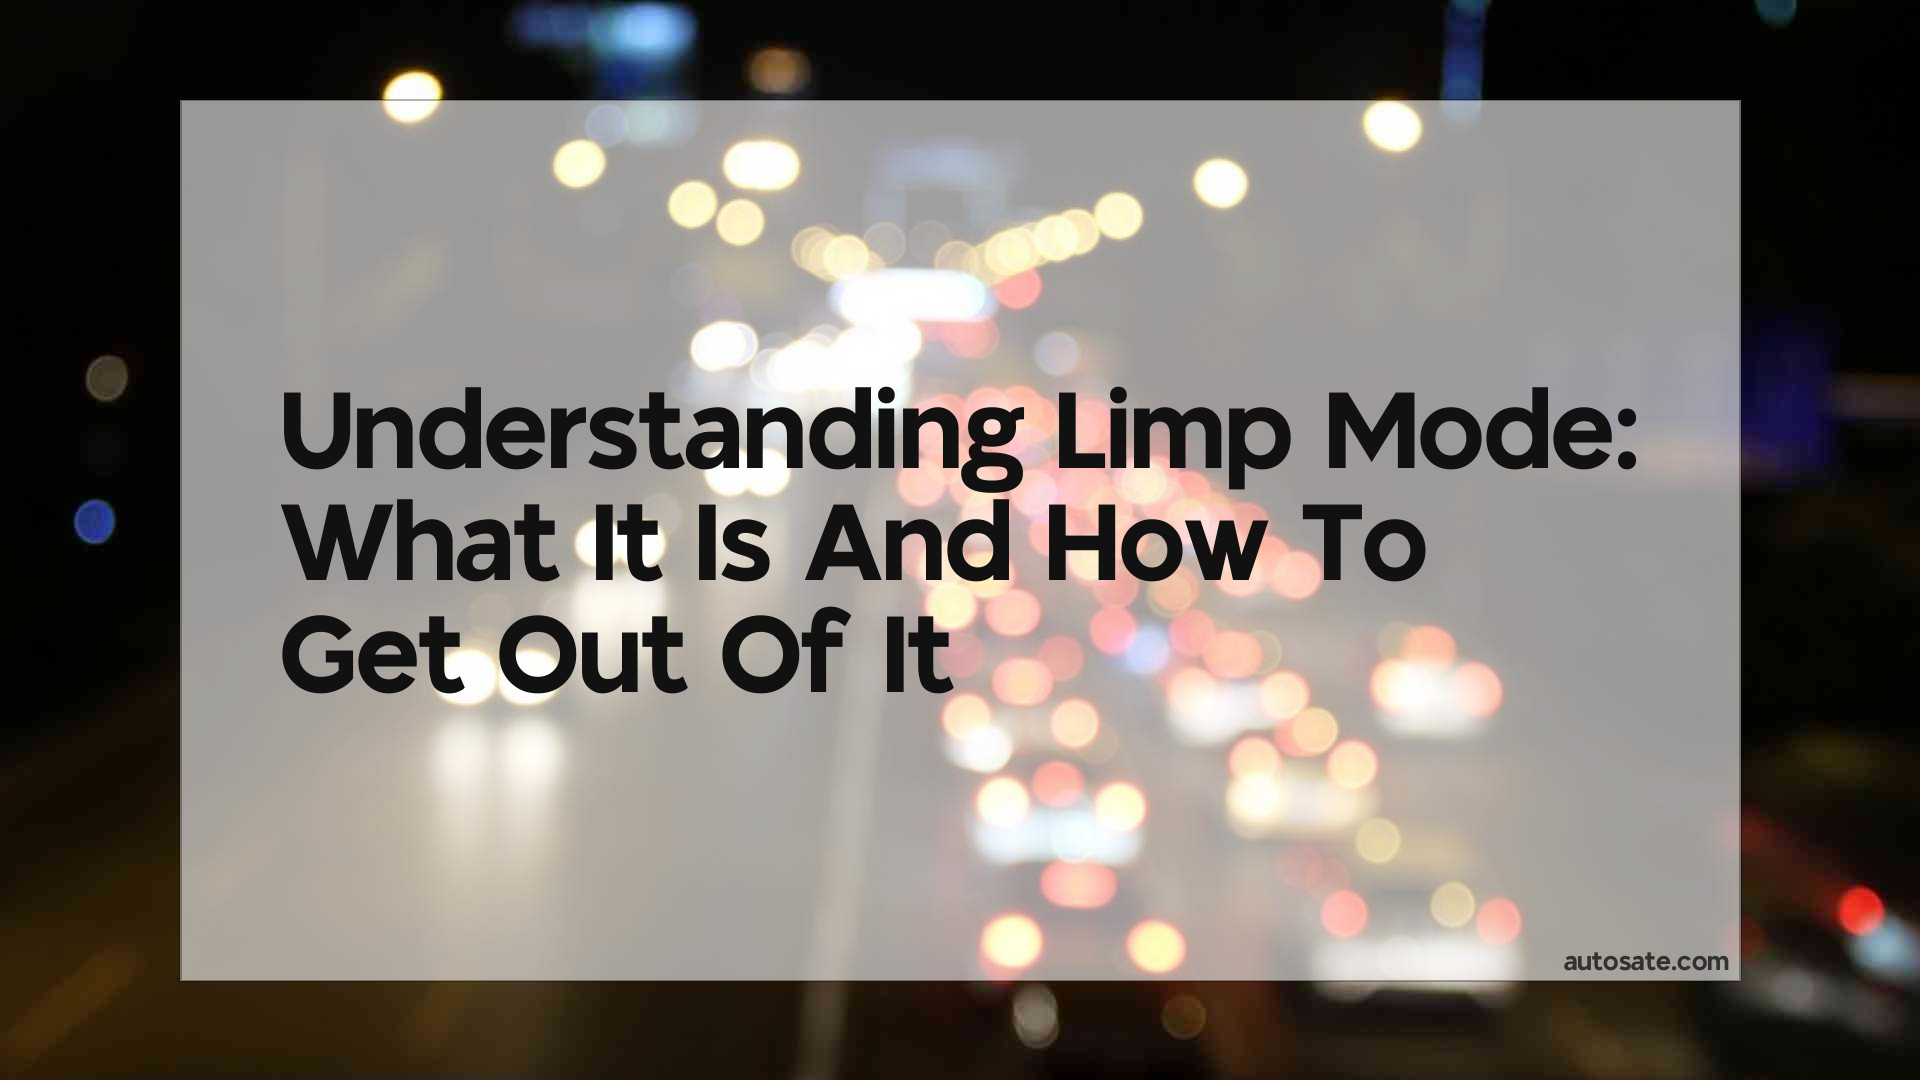 Understanding Limp Mode: What It Is And How To Get Out Of It